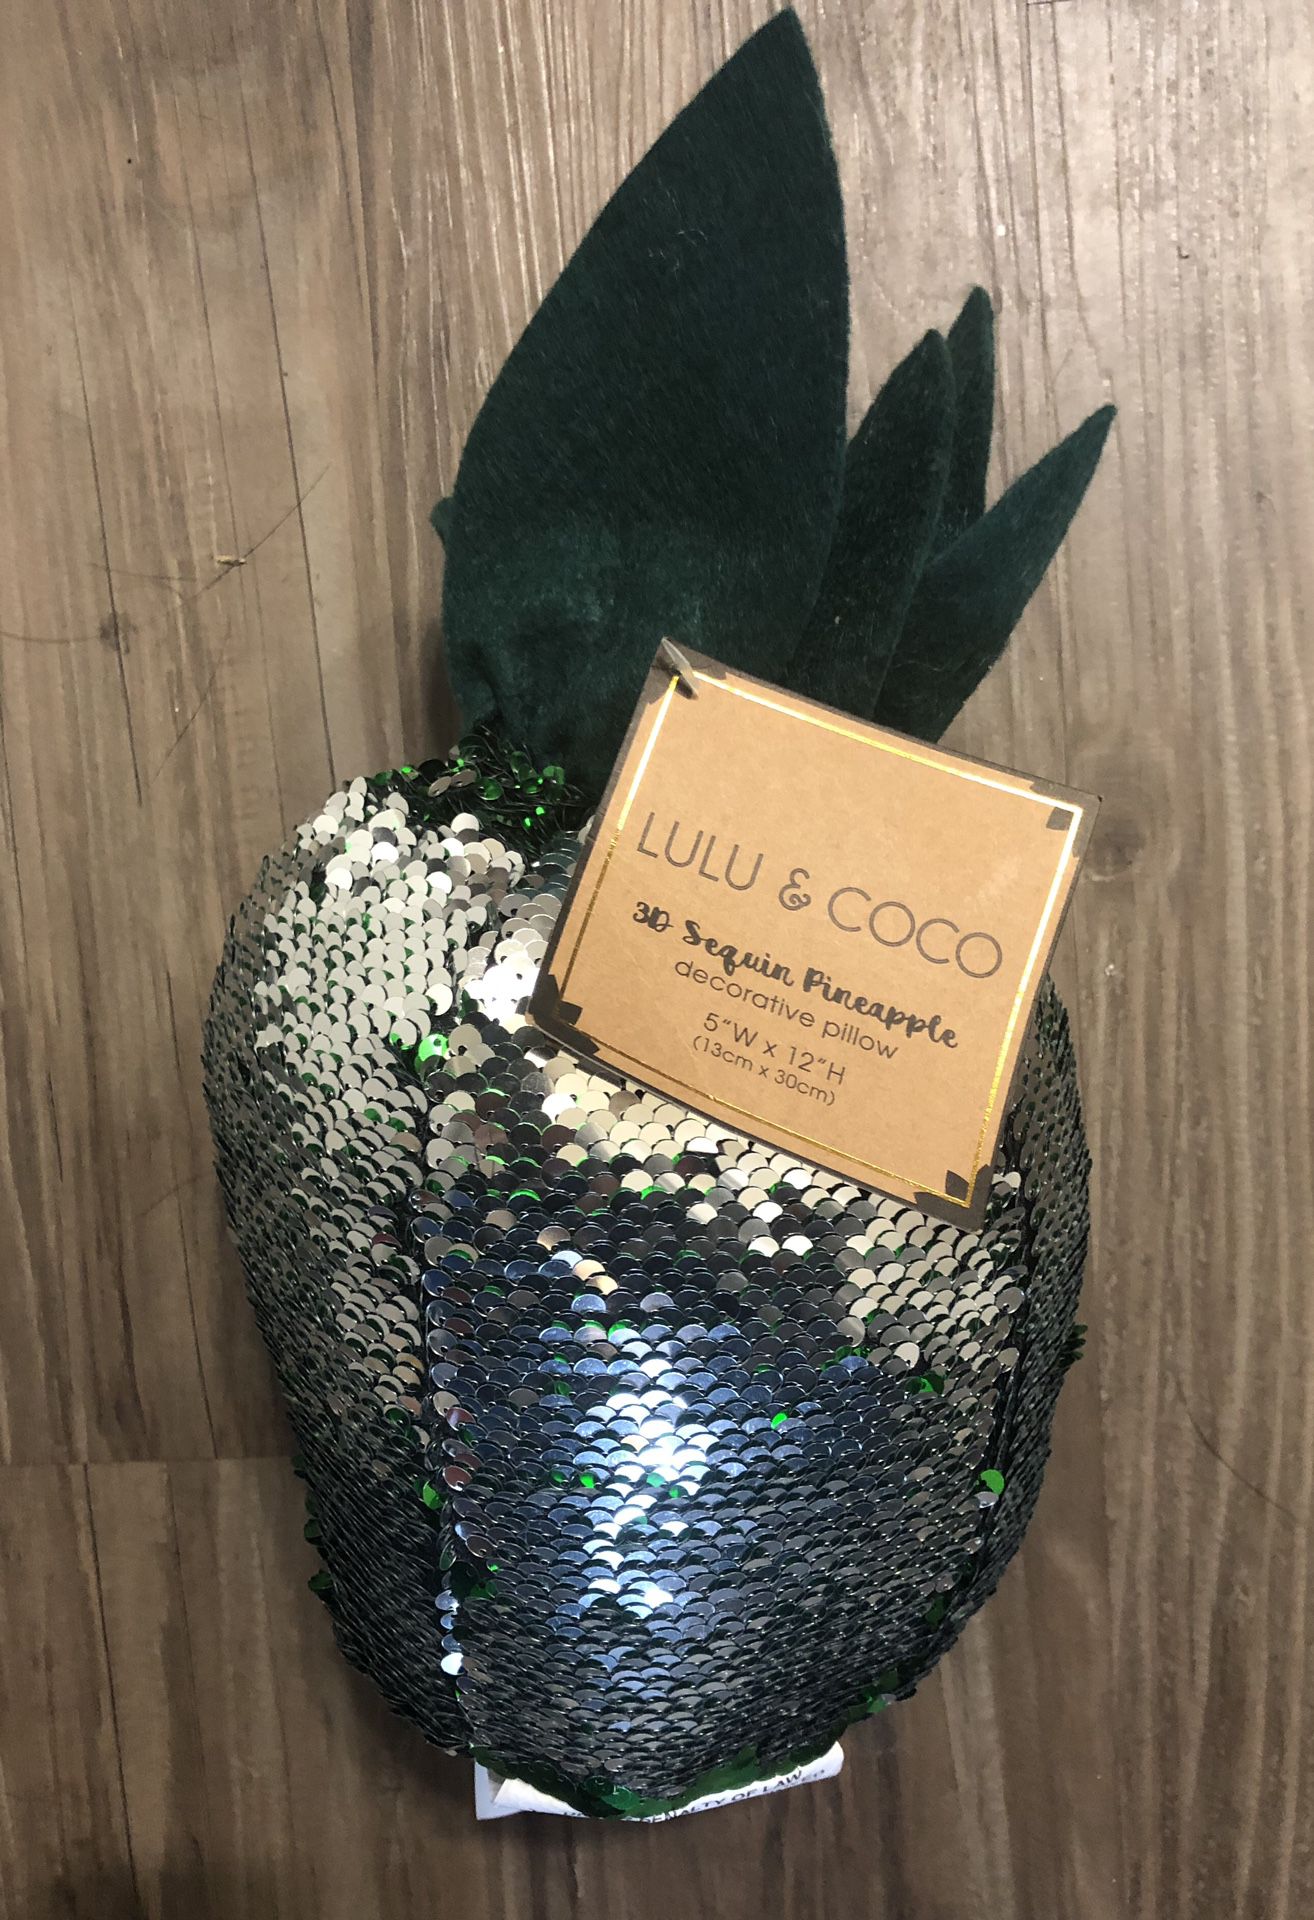 Sequin pineapple decorative pillow silver/ green size 5” W x 12” H